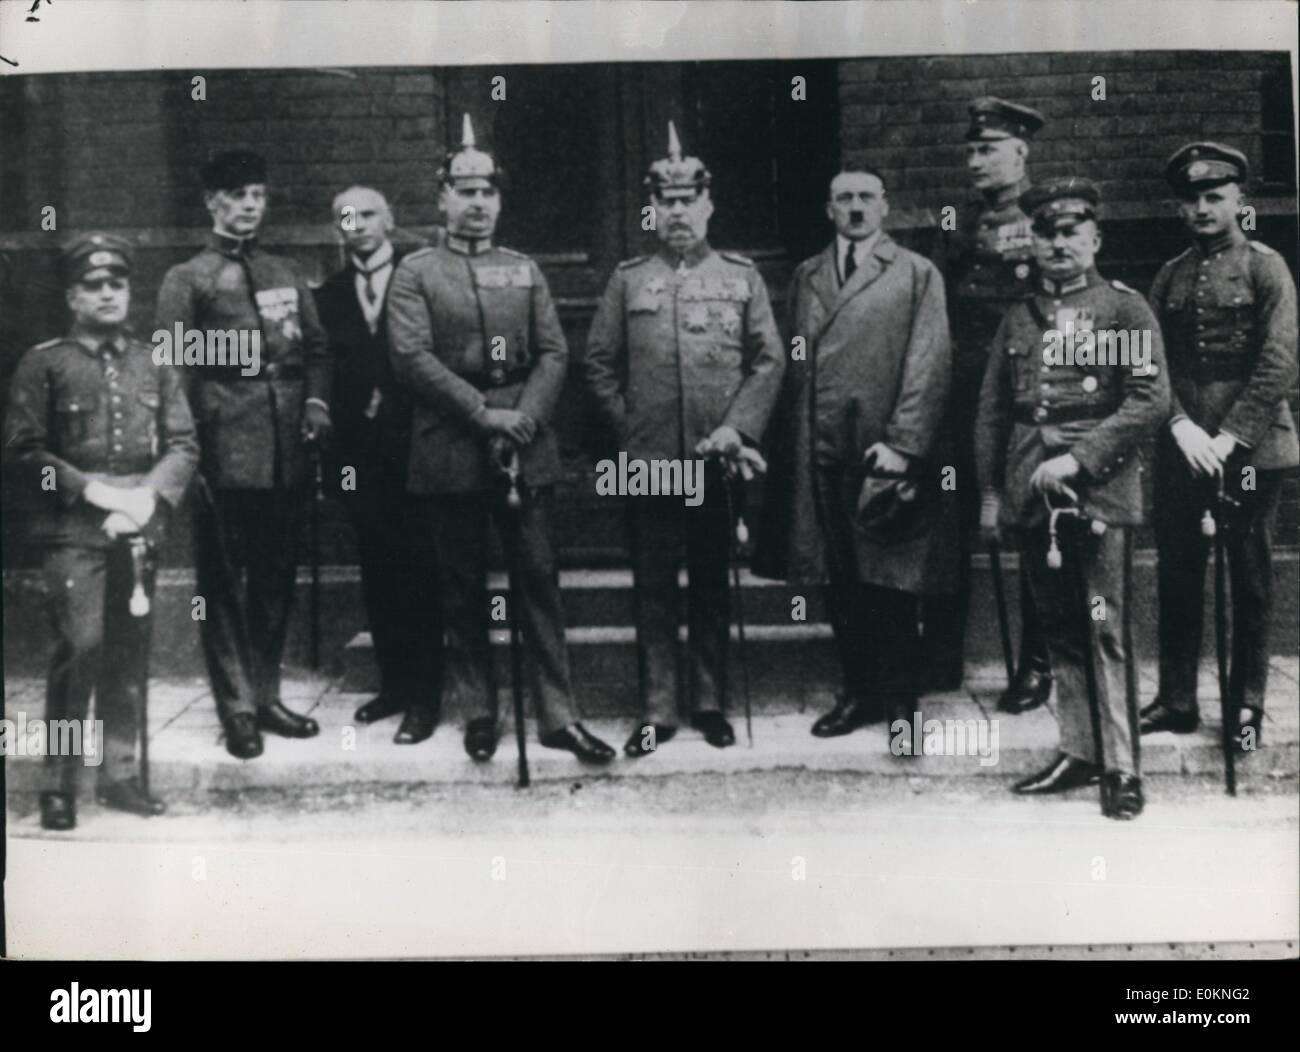 Jan. 1, 1930 - ADOLF HITLER and German general ERIC LUDENDORF center exact date unknown Stock Photo